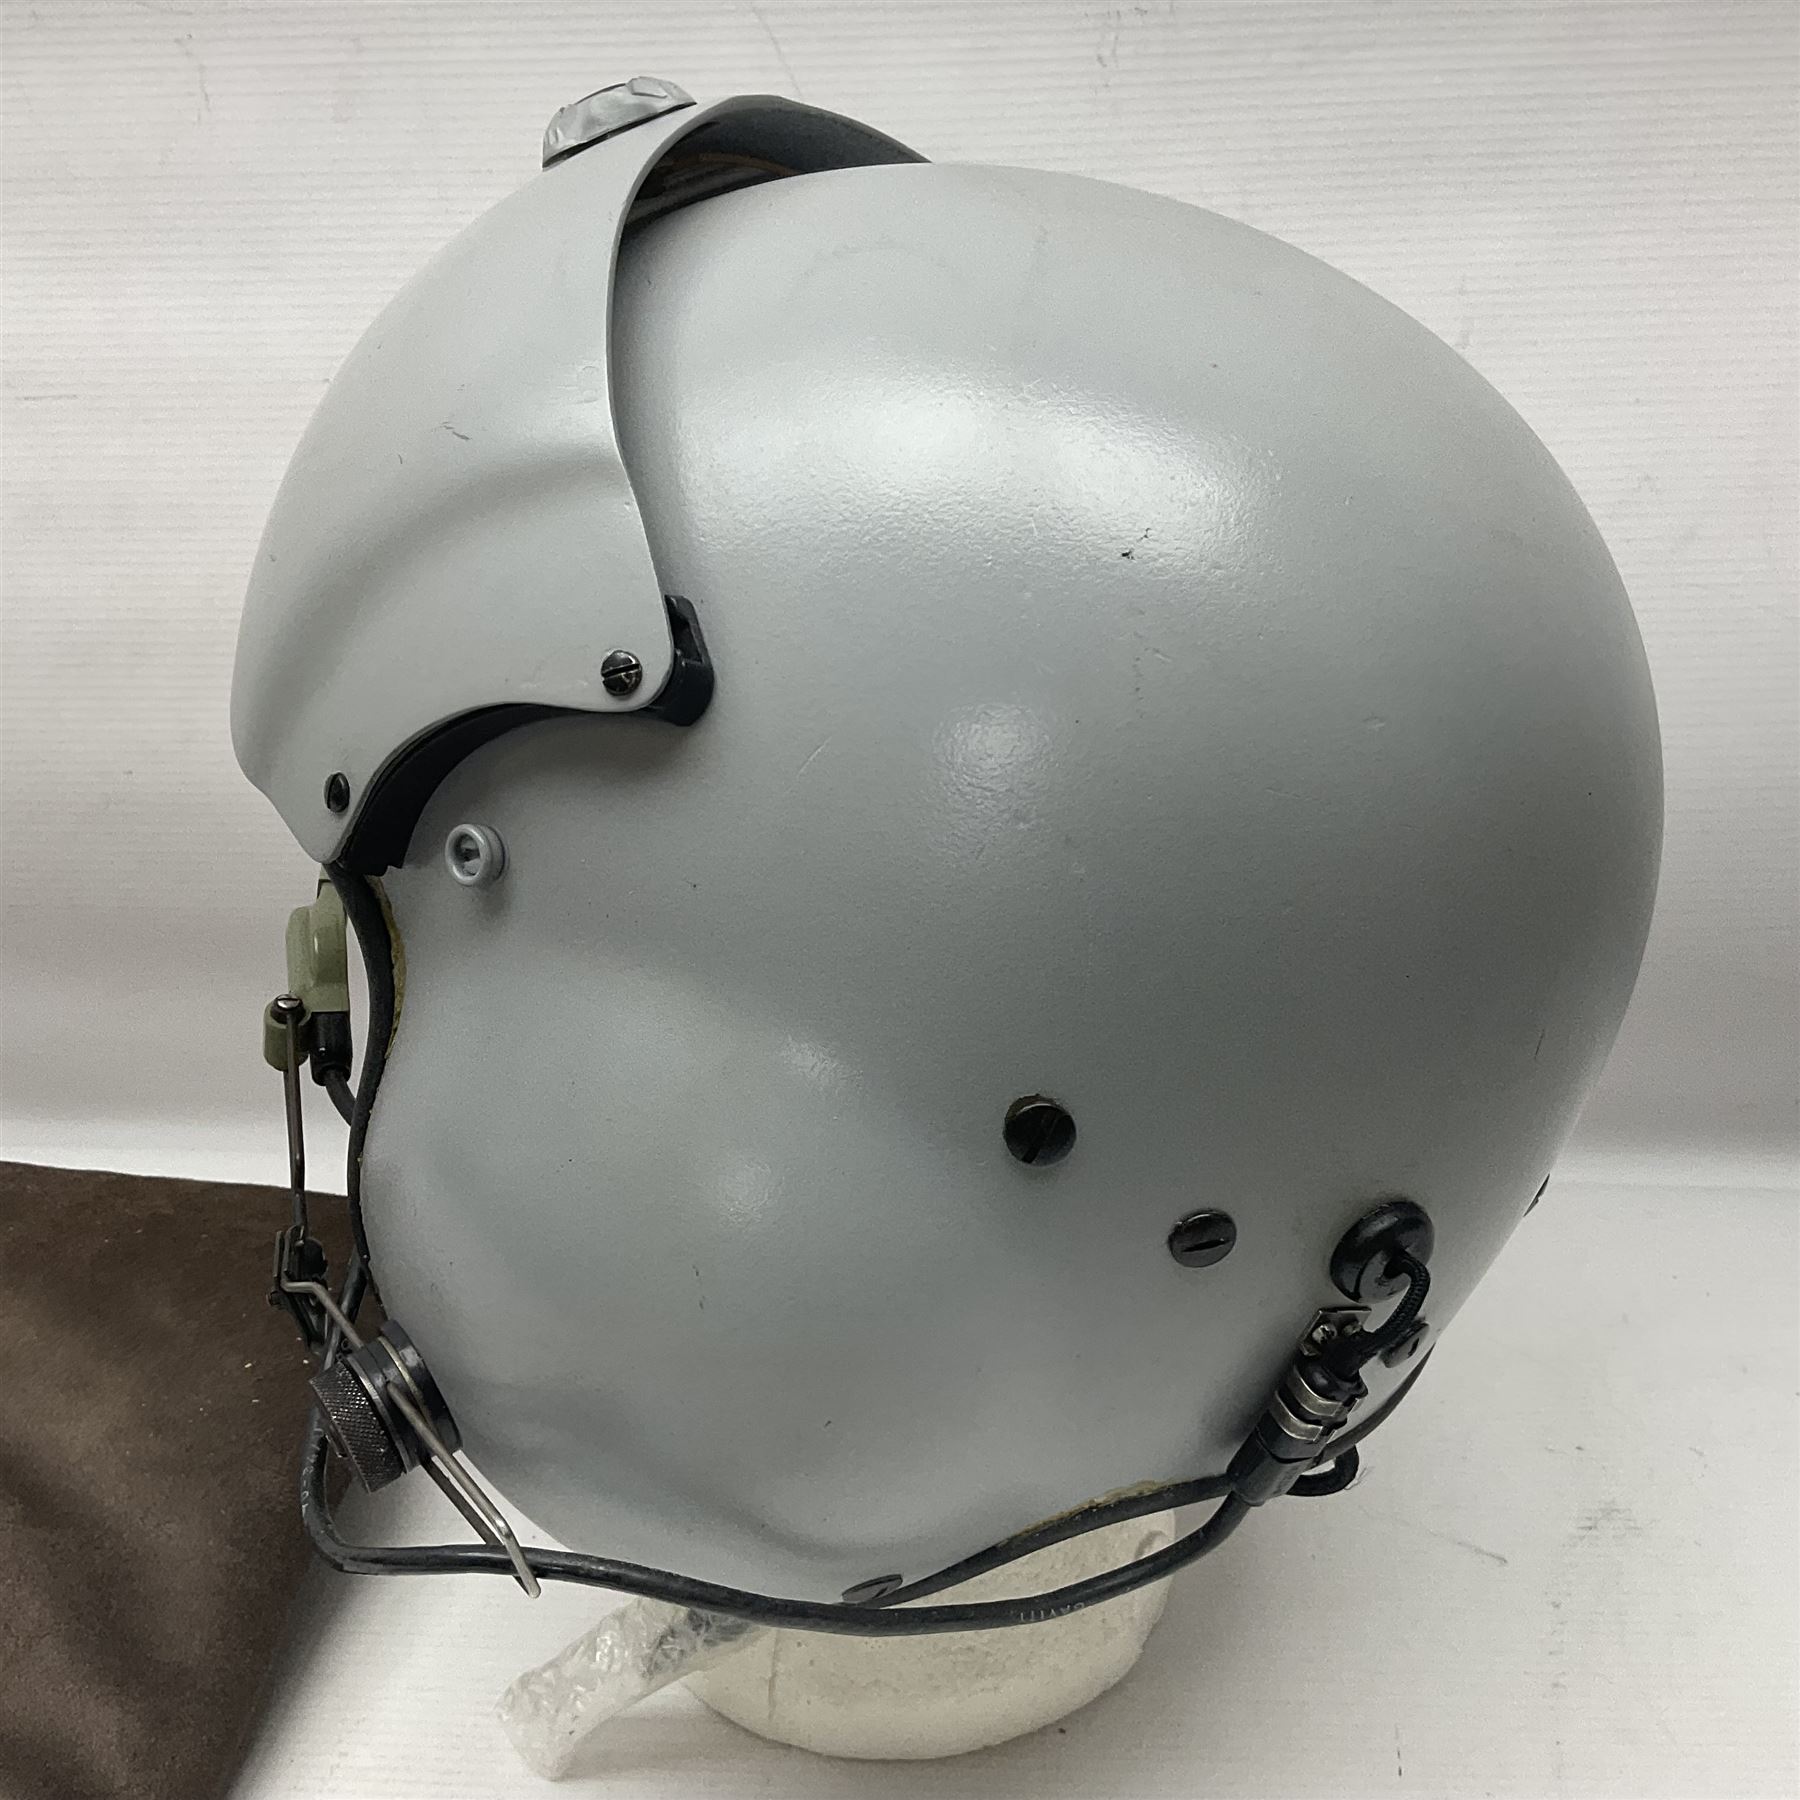 Silver grey SPH-4B Flight Helmet as used by helicopter pilots in the USAF and US Army in the 1990s; - Image 6 of 20